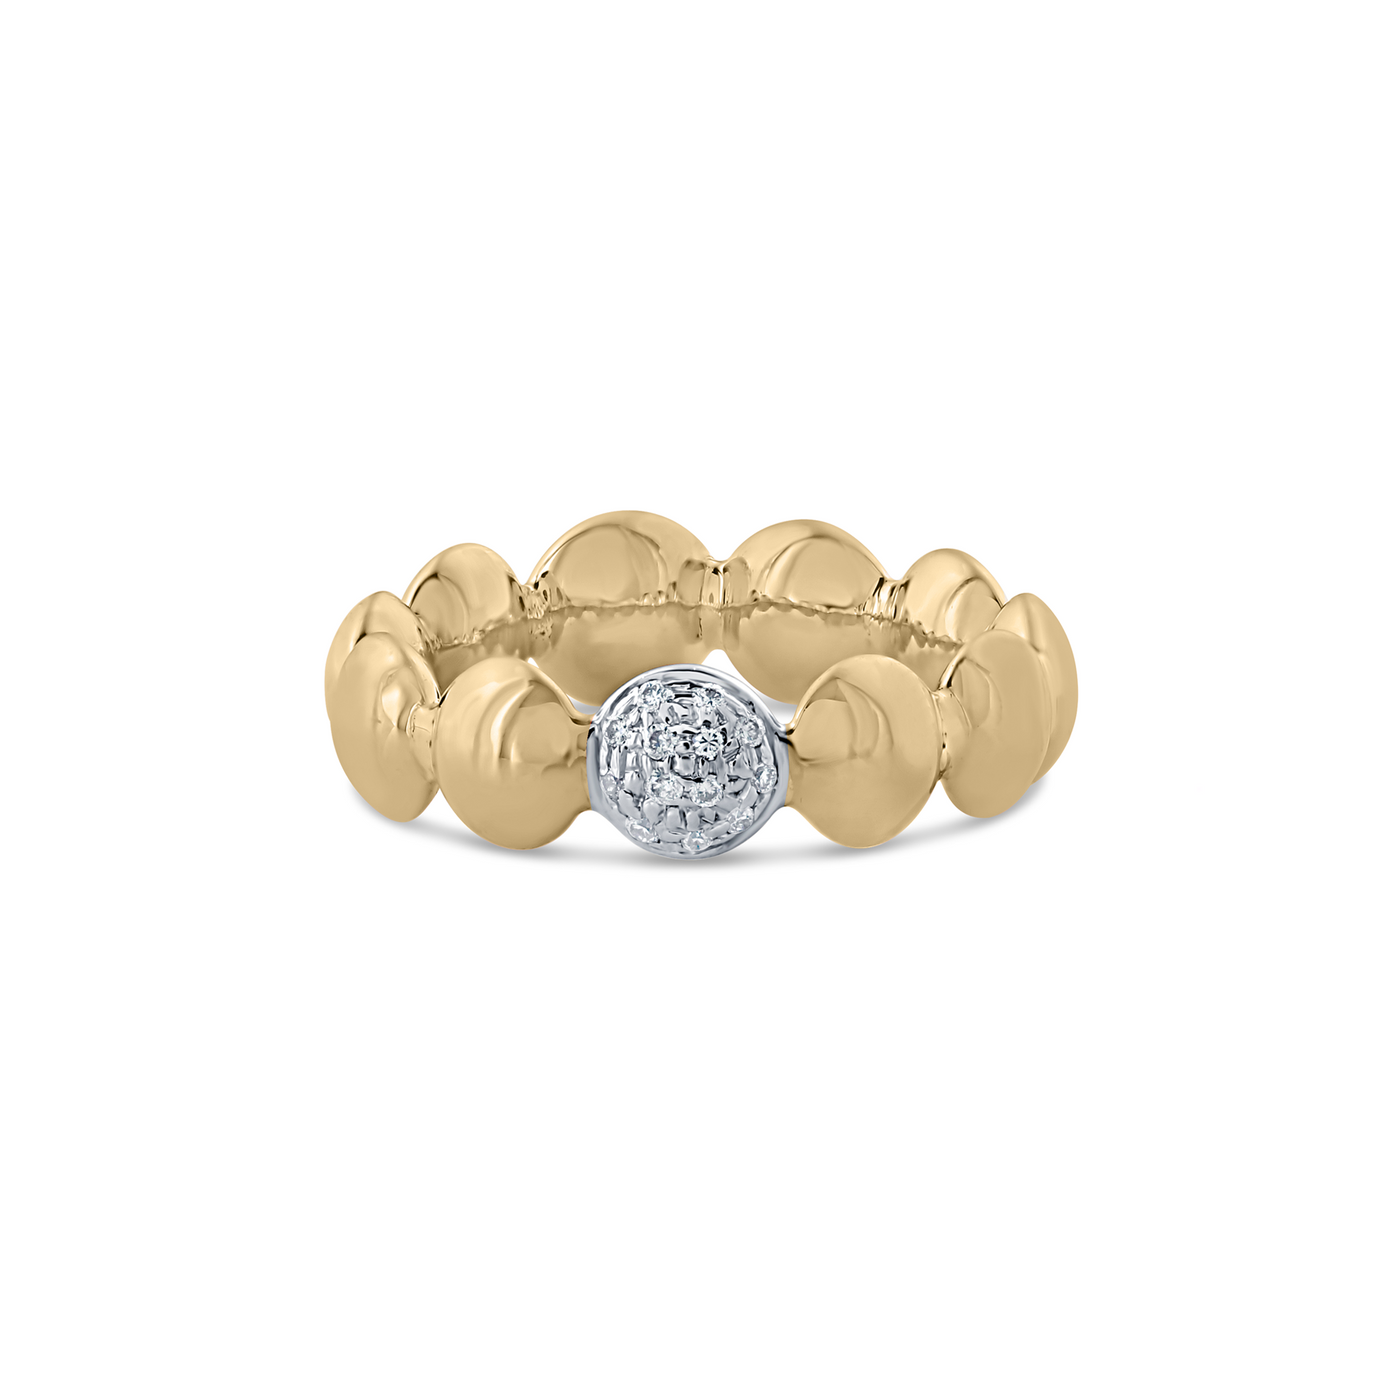 Lente Ring With Diamond Accent In 18K Gold